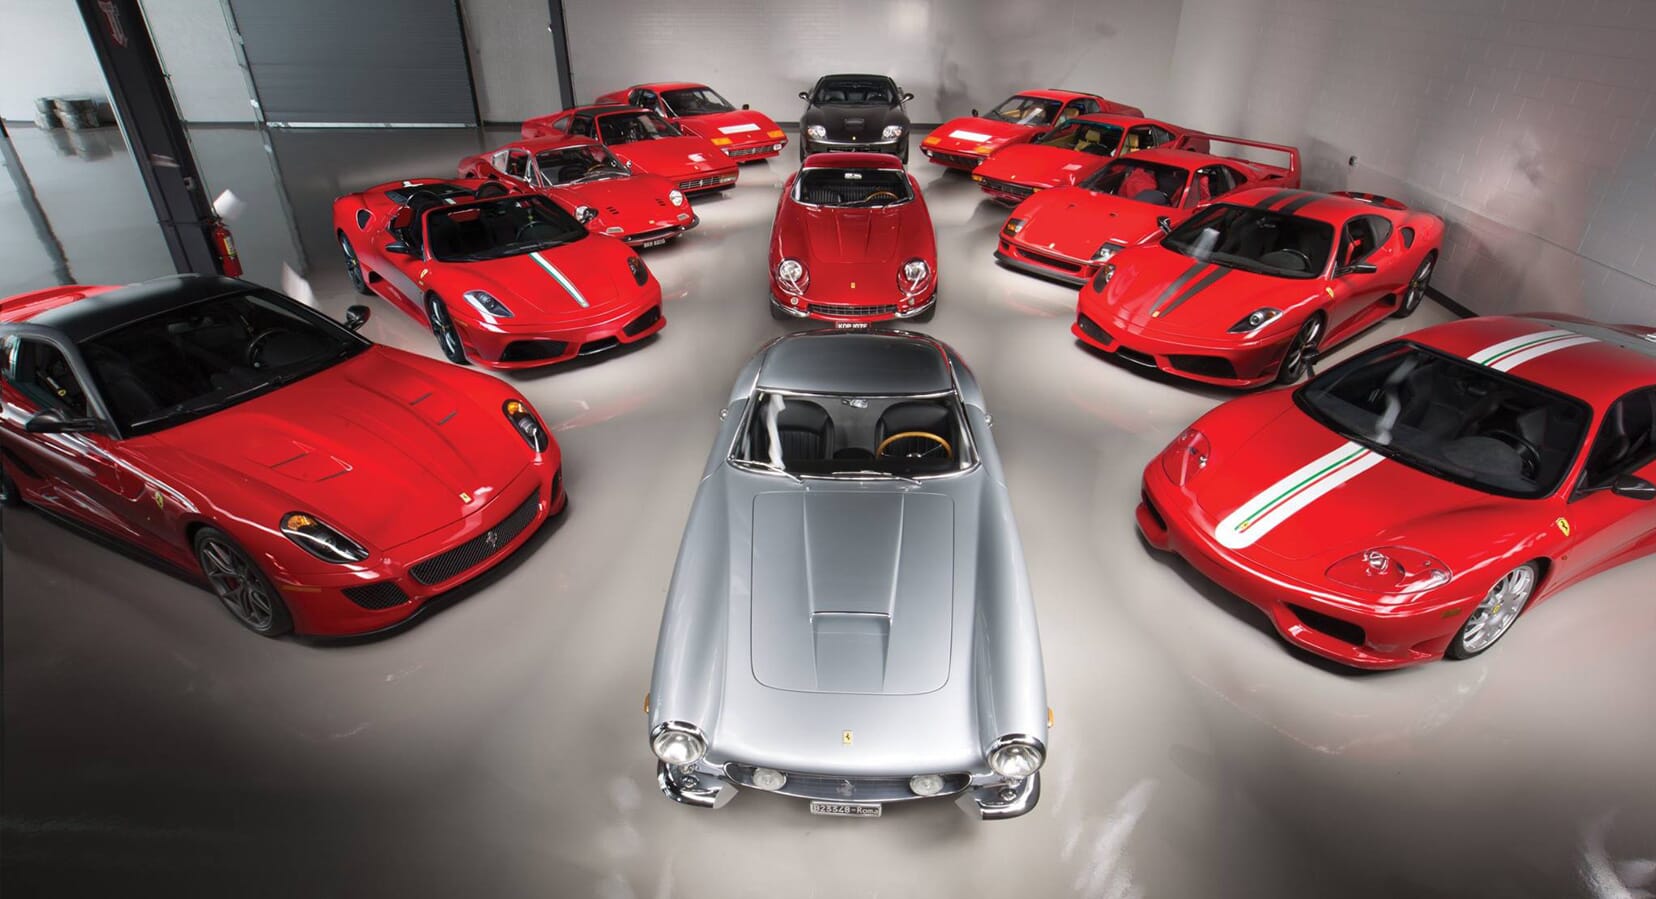 RM Sotheby’s is Auctioning Some of the World’s Finest Ferraris